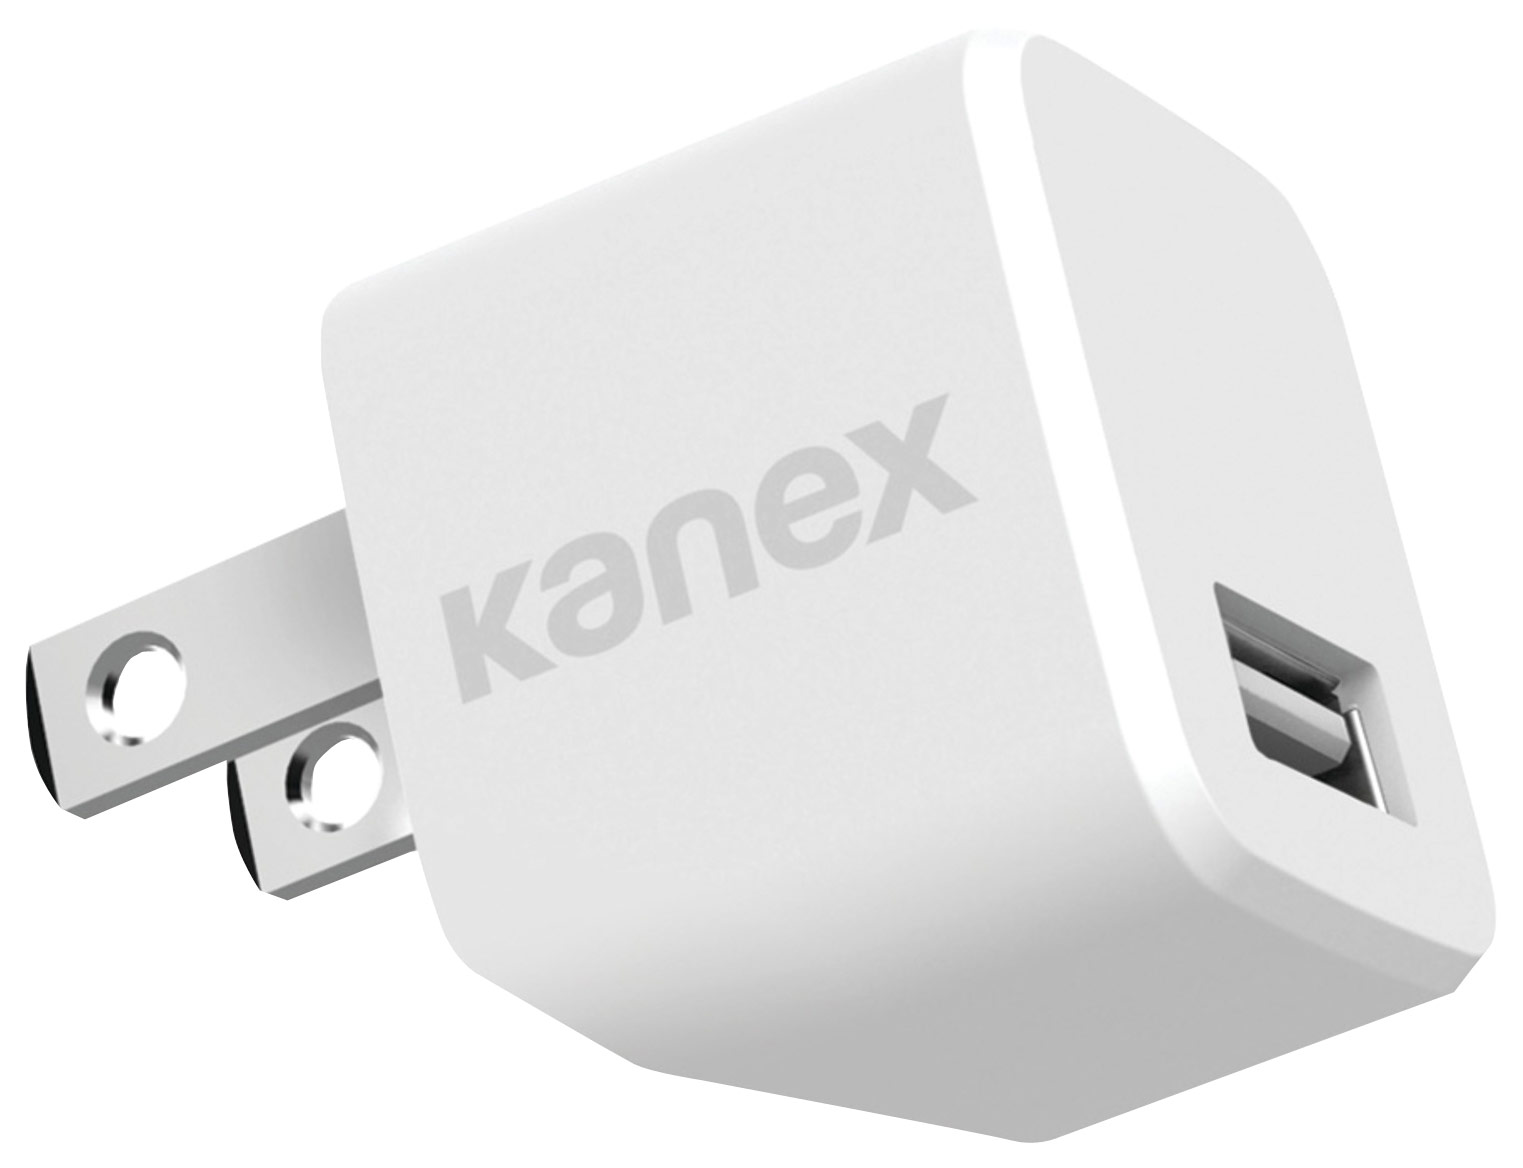 Kanex - Wall Charger - White